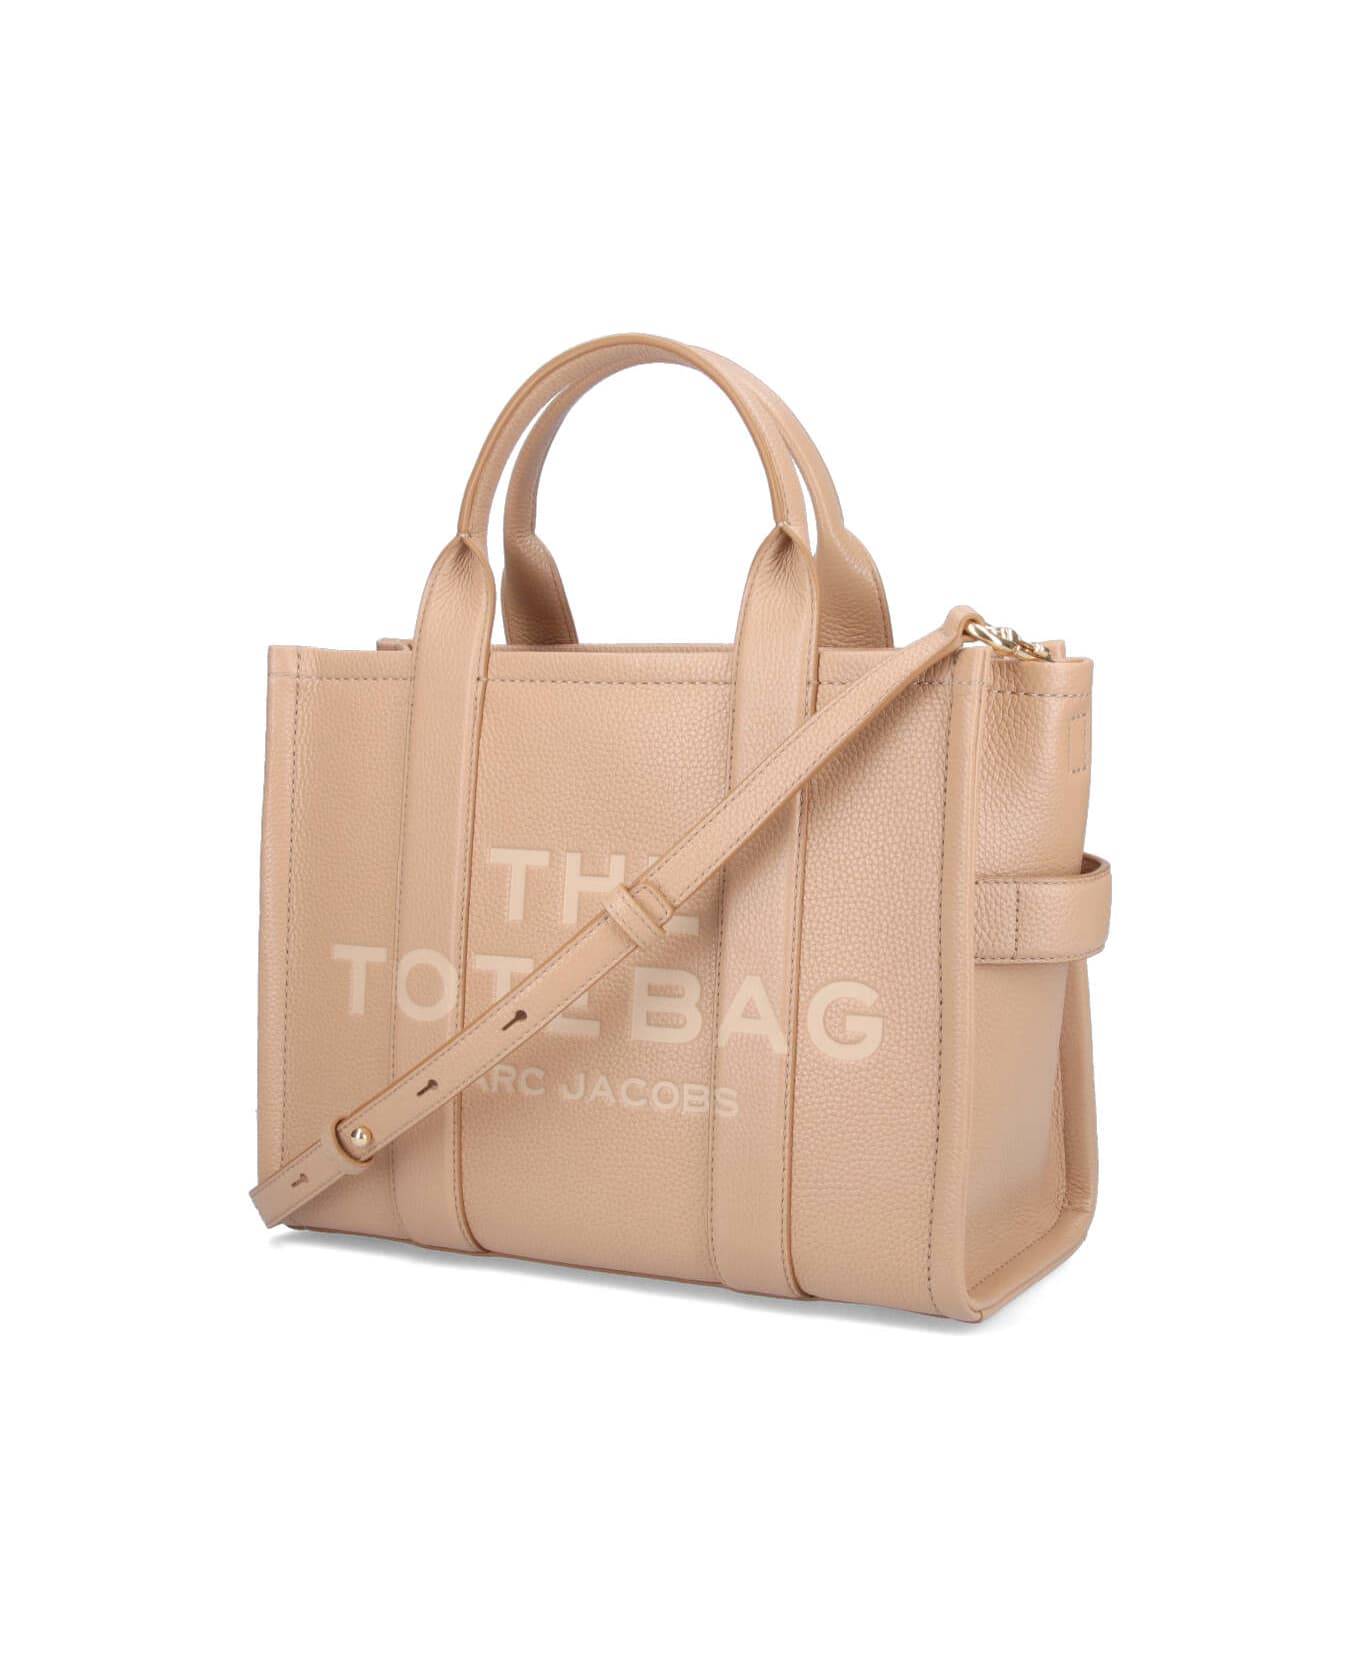 Marc Jacobs The Leather Medium Tote Bag - Camel トートバッグ